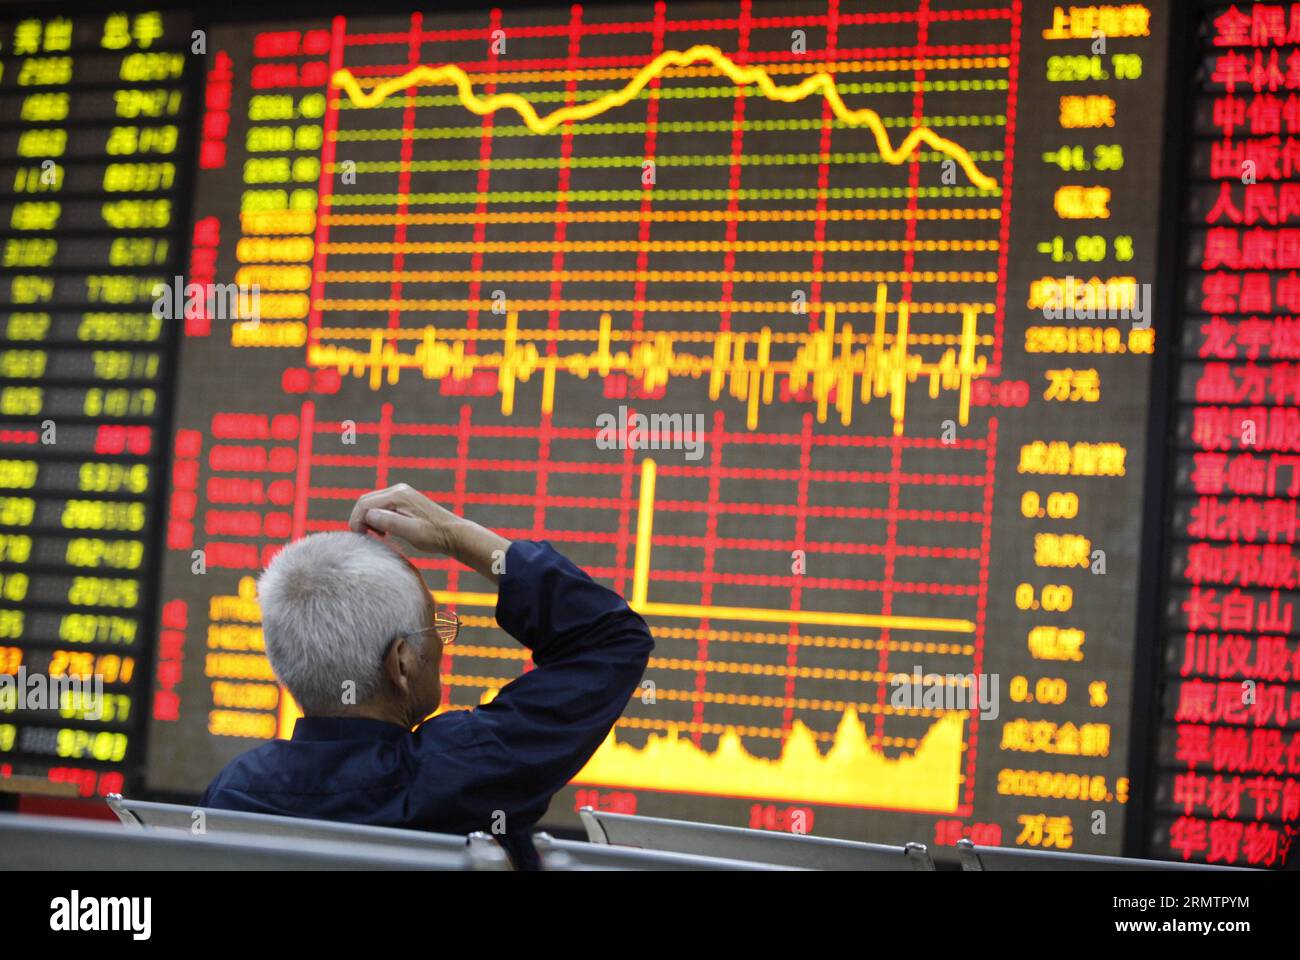 An investor reads stock information at a trading hall of a securities firm in Huaibei City, east China s Anhui Province, Sept. 16, 2014. Chinese shares closed lower on Tuesday, with the benchmark Shanghai Composite Index down 1.82 percent to finish at 2,296.55 points, owing to the plunge of growth enterprises. The smaller Shenzhen Component Index lost 191.57 points, or 2.36 percent, to close at 7,921.07 points. ) (ry) CHINA-STOCK-DROP (CN) XiexZhengyi PUBLICATIONxNOTxINxCHN   to Investor reads Stick Information AT a Trading Hall of a Securities Firm in Huaibei City East China S Anhui Province Stock Photo